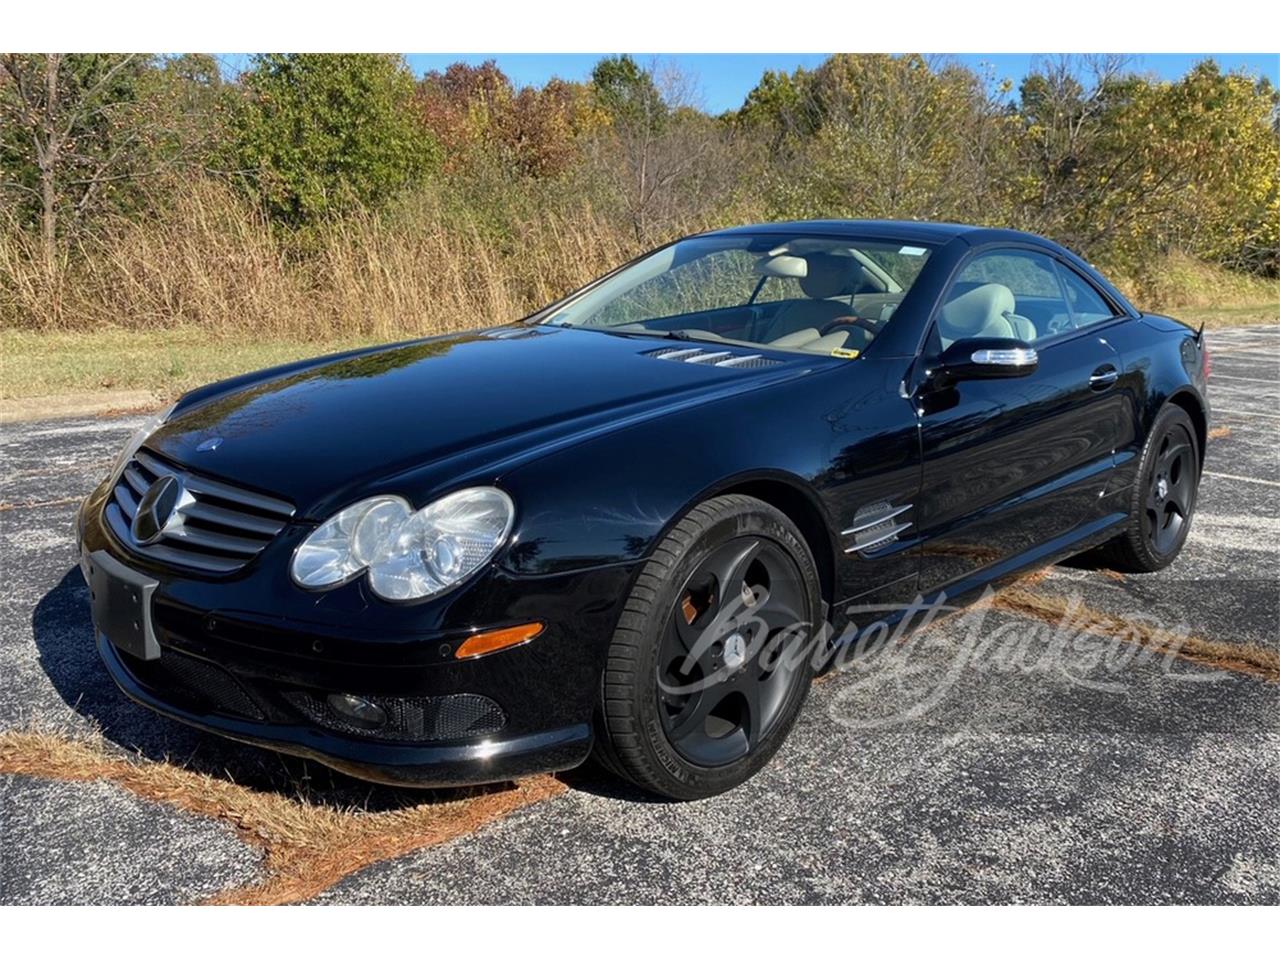 For Sale at Auction: 2005 Mercedes-Benz 500SL in Scottsdale, Arizona for sale in Scottsdale, AZ